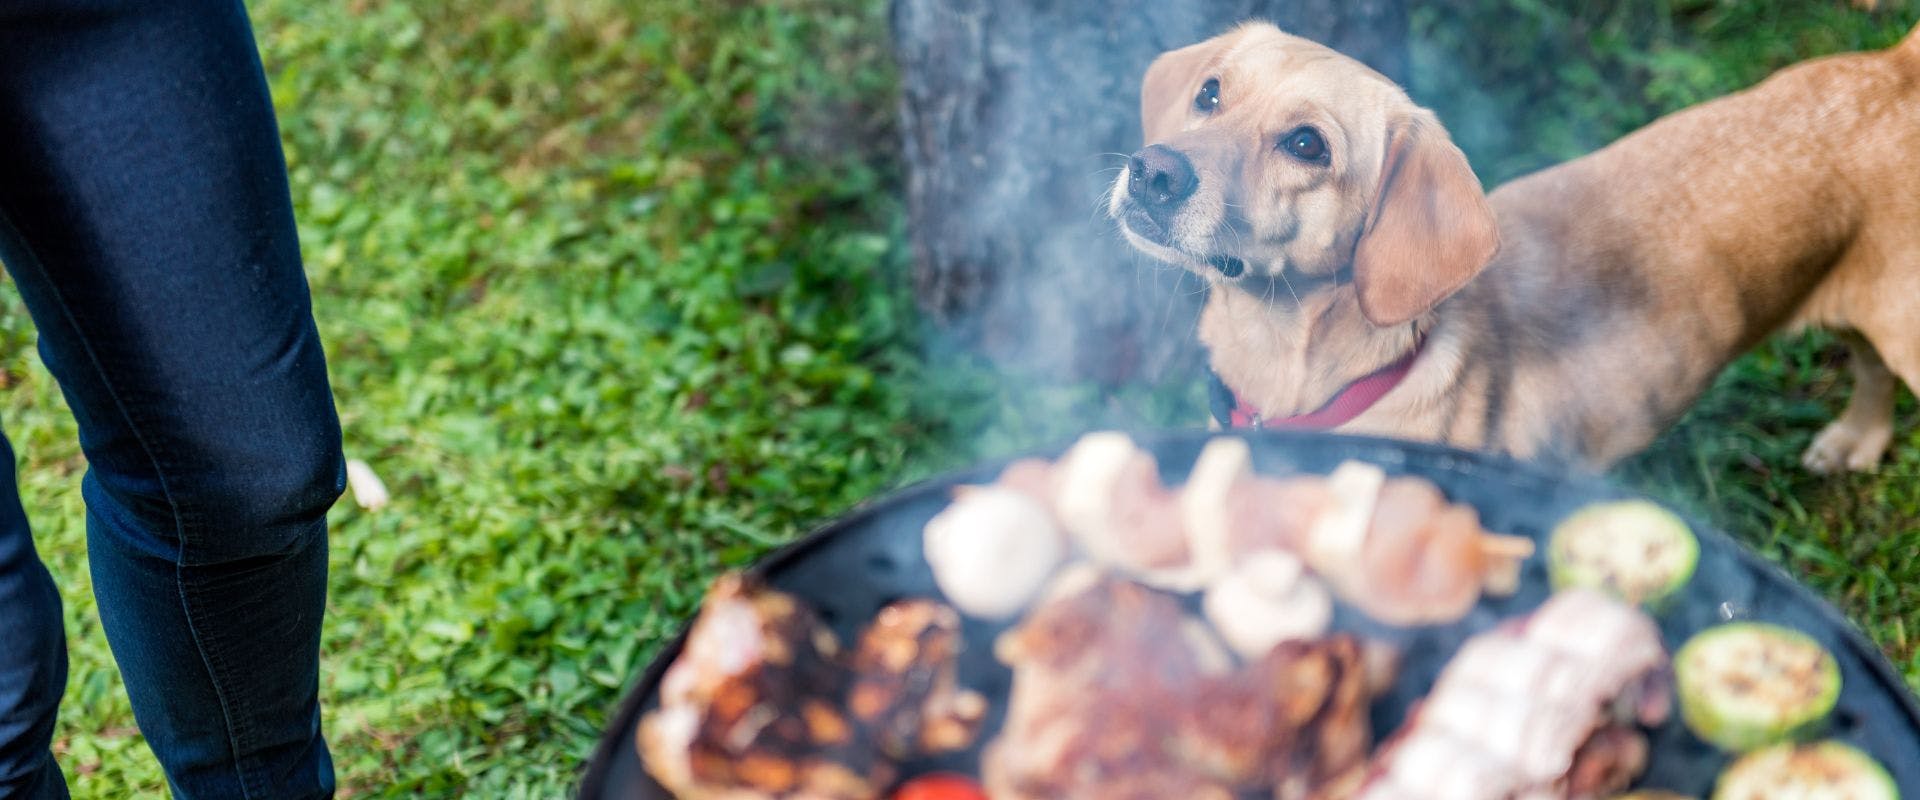 Dog stood near a barbeque grilling mushrooms